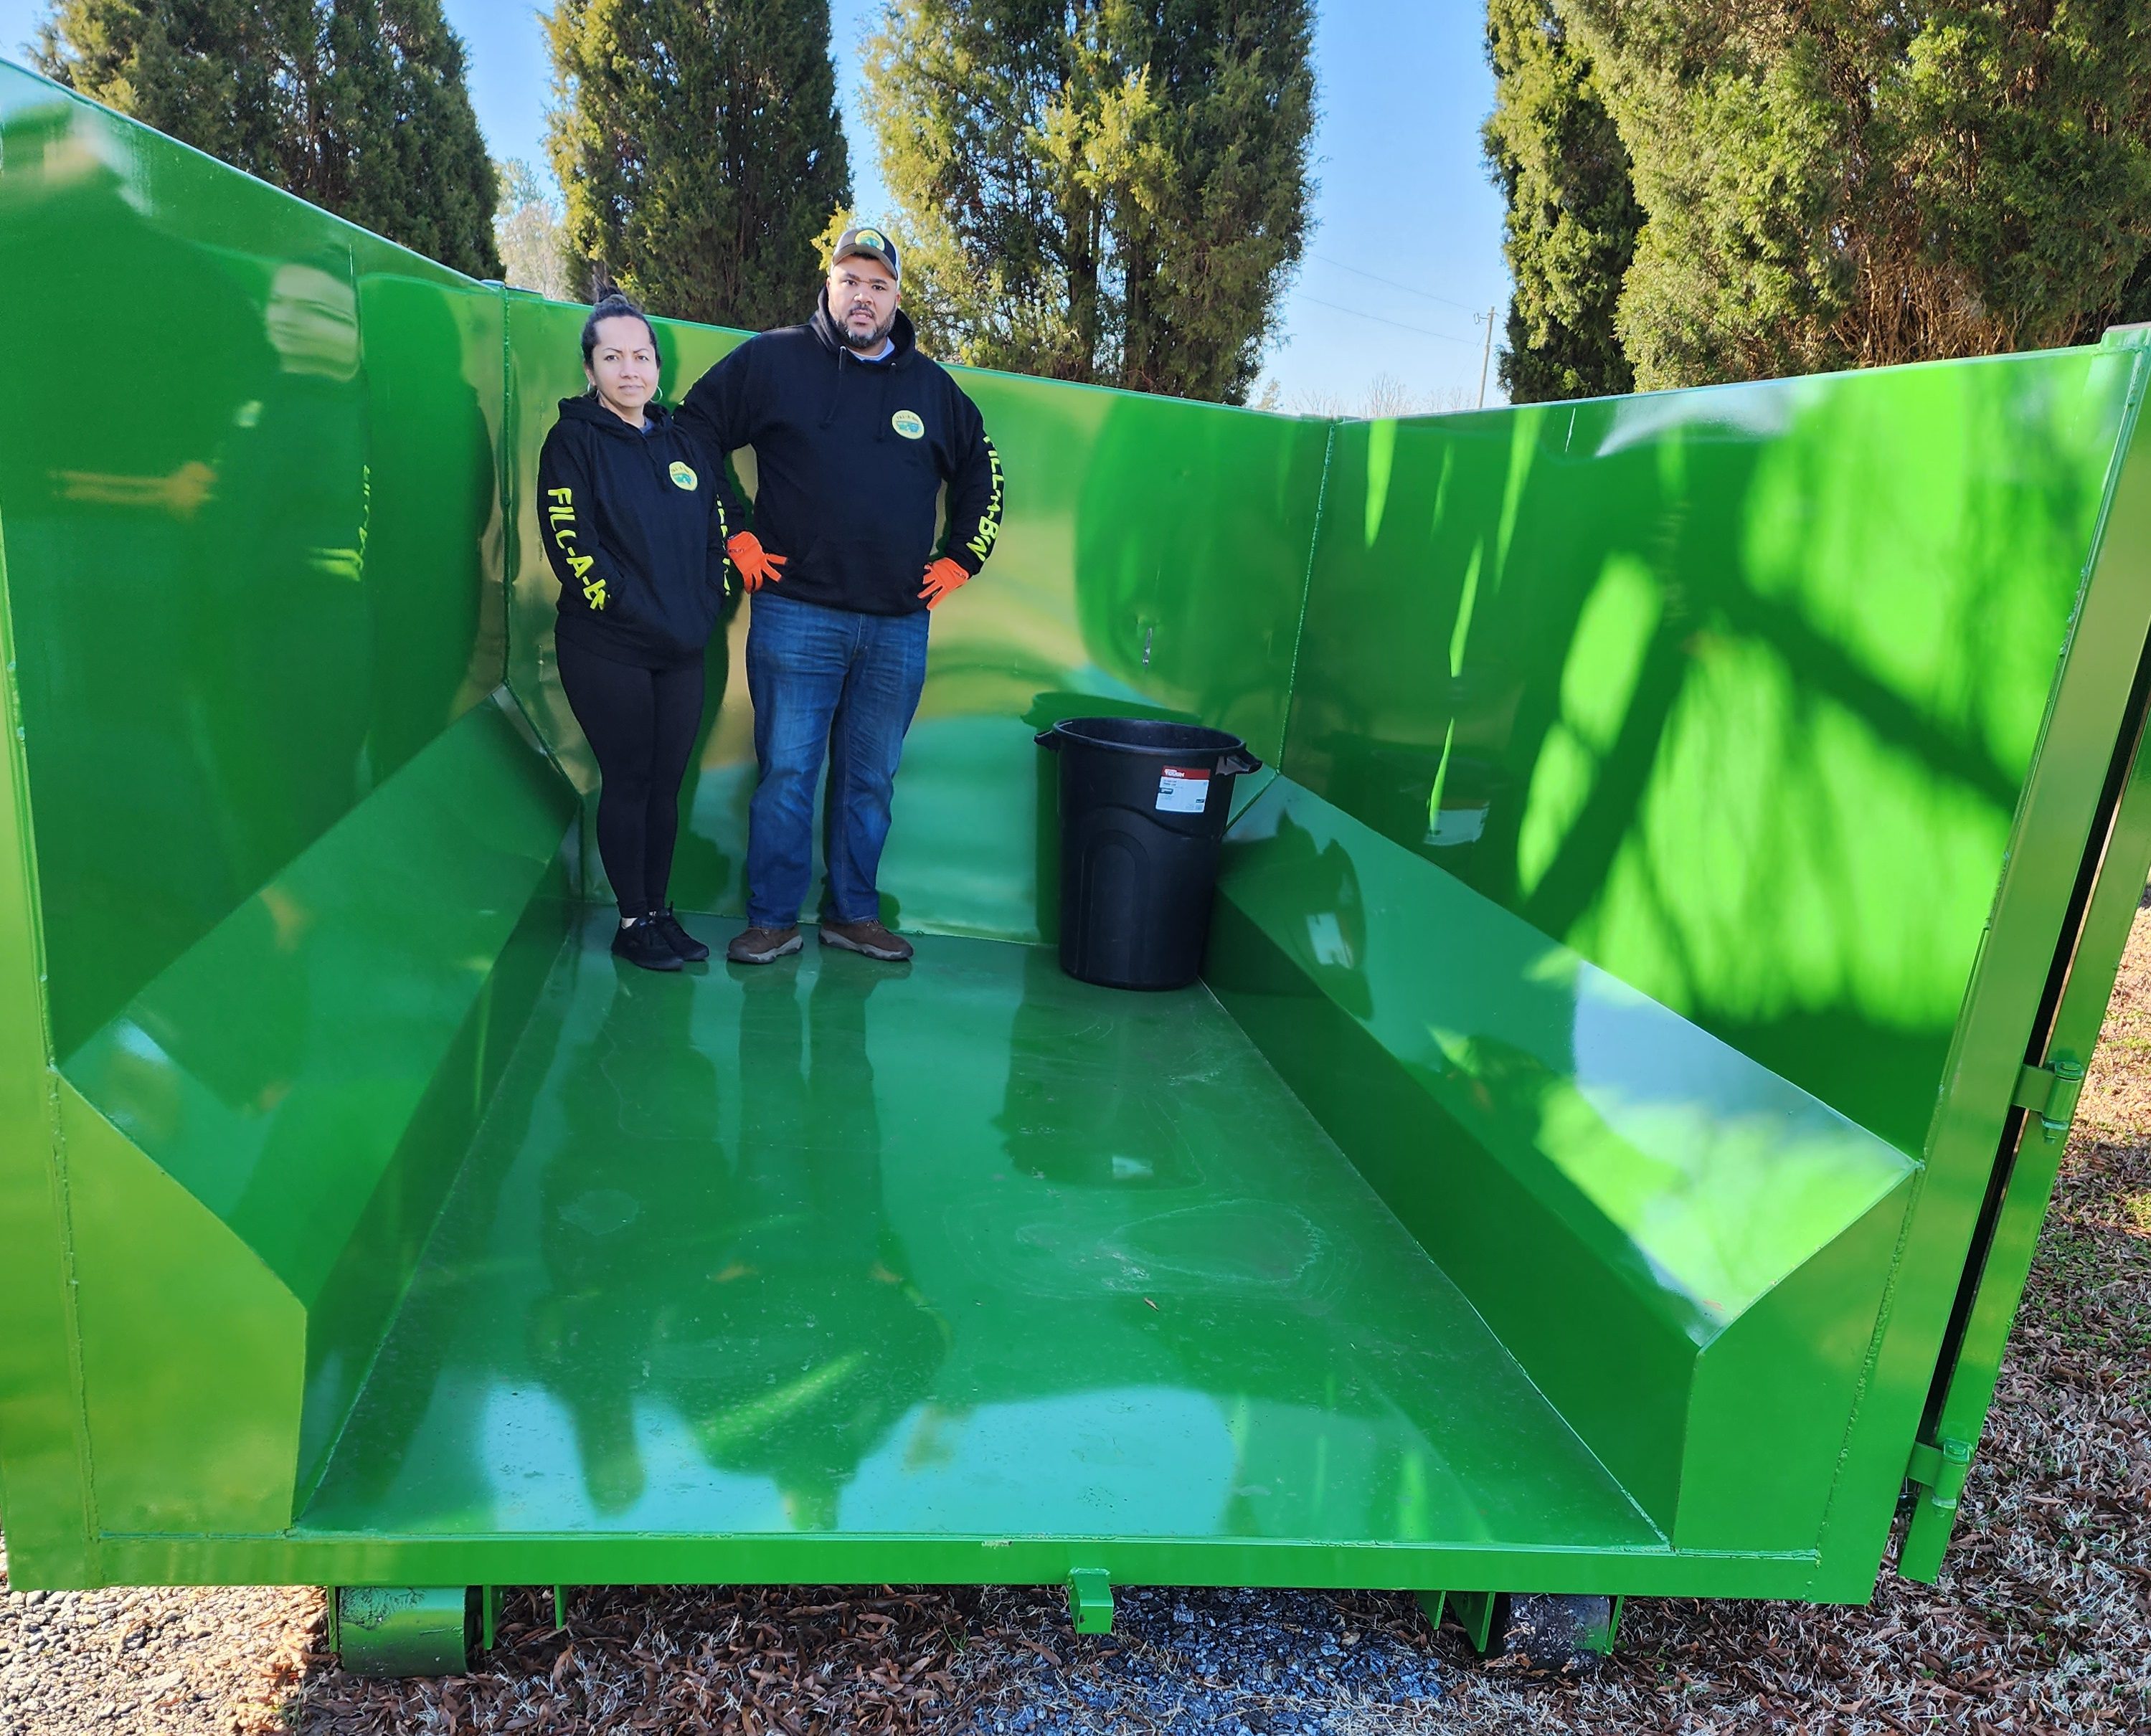 Frank Gibbs and family standing inside of a large empty green dumpster